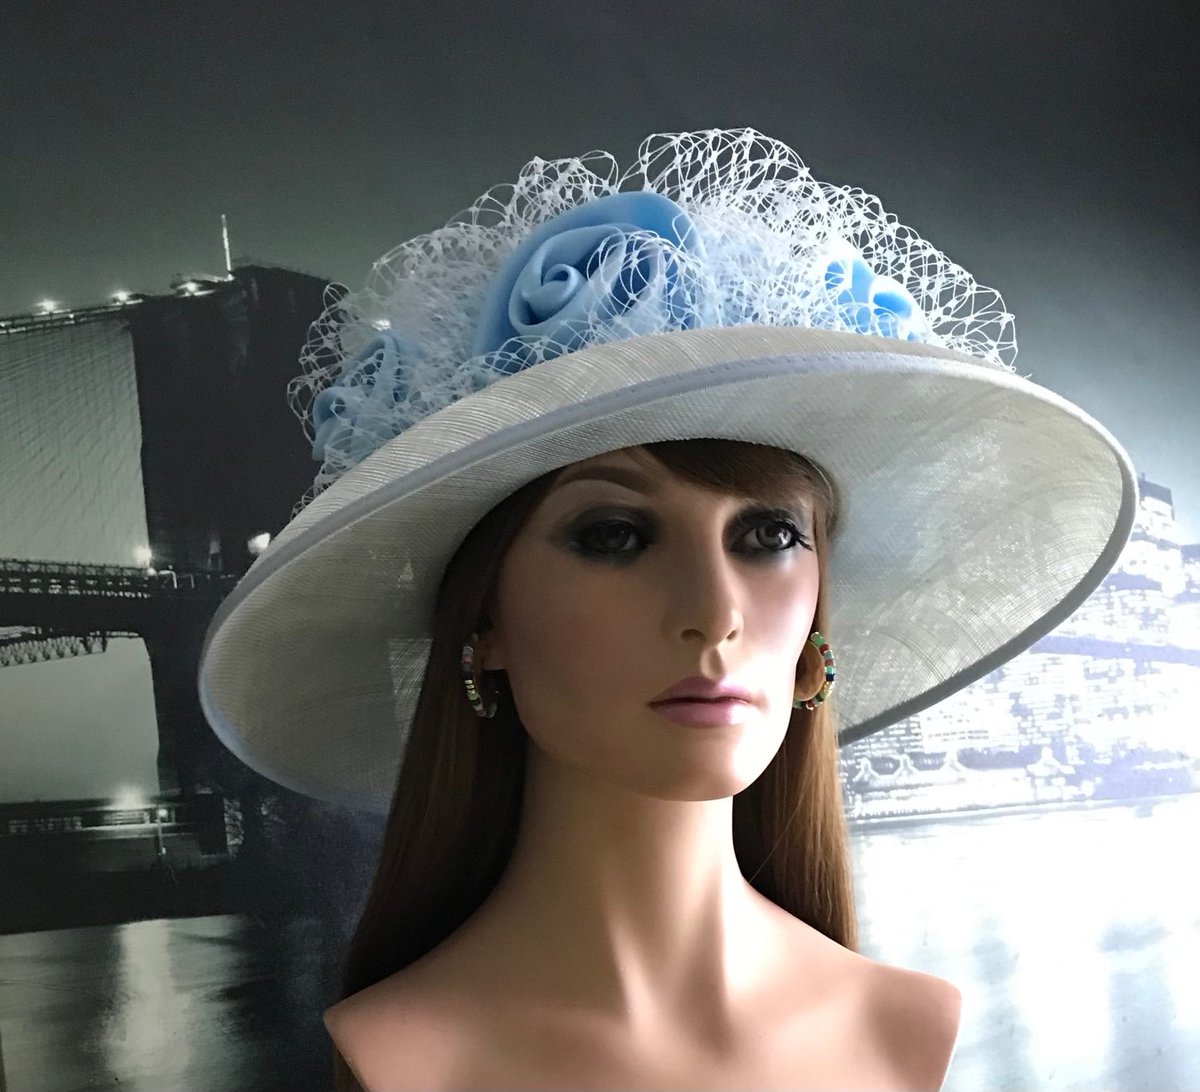 Excited to share the latest addition to my #etsy shop: Light blue natural fibre hat by cappelli condici summer / spring / blue hat / formal/ wedding / Royal Ascot / Cappelli Condici / church etsy.me/3yhlLoU #blue #wedding #formalevent #lightblue #floral #formal #stylish